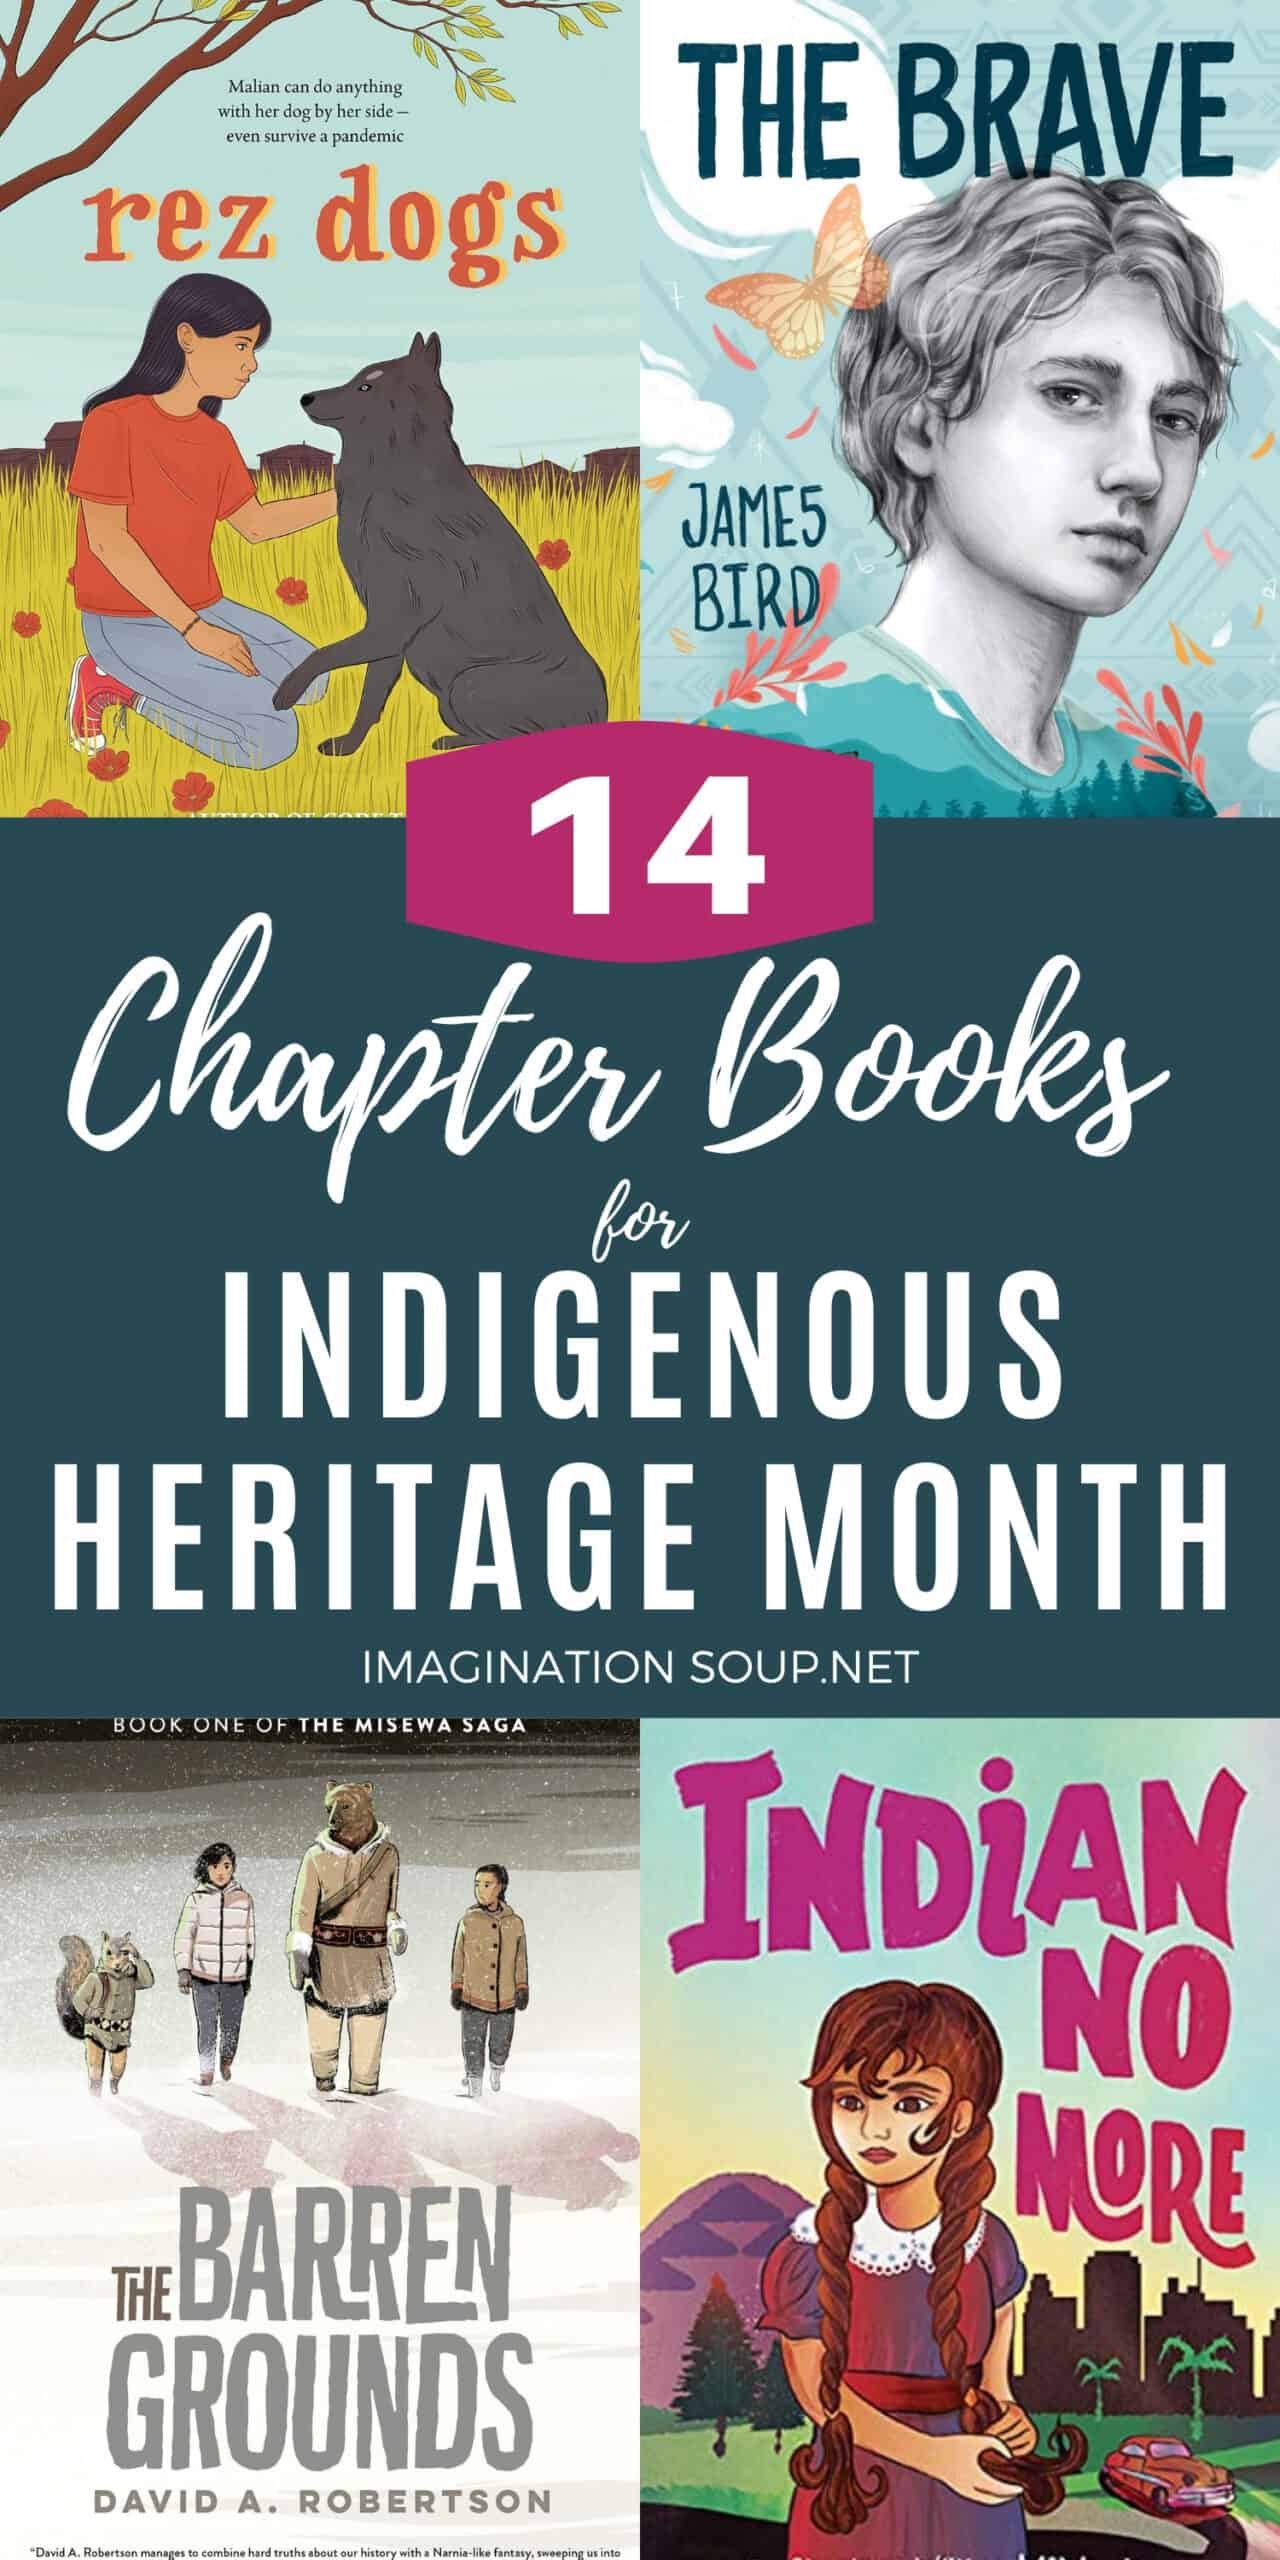 Indigenous / Native American Heritage Month Books for Kids